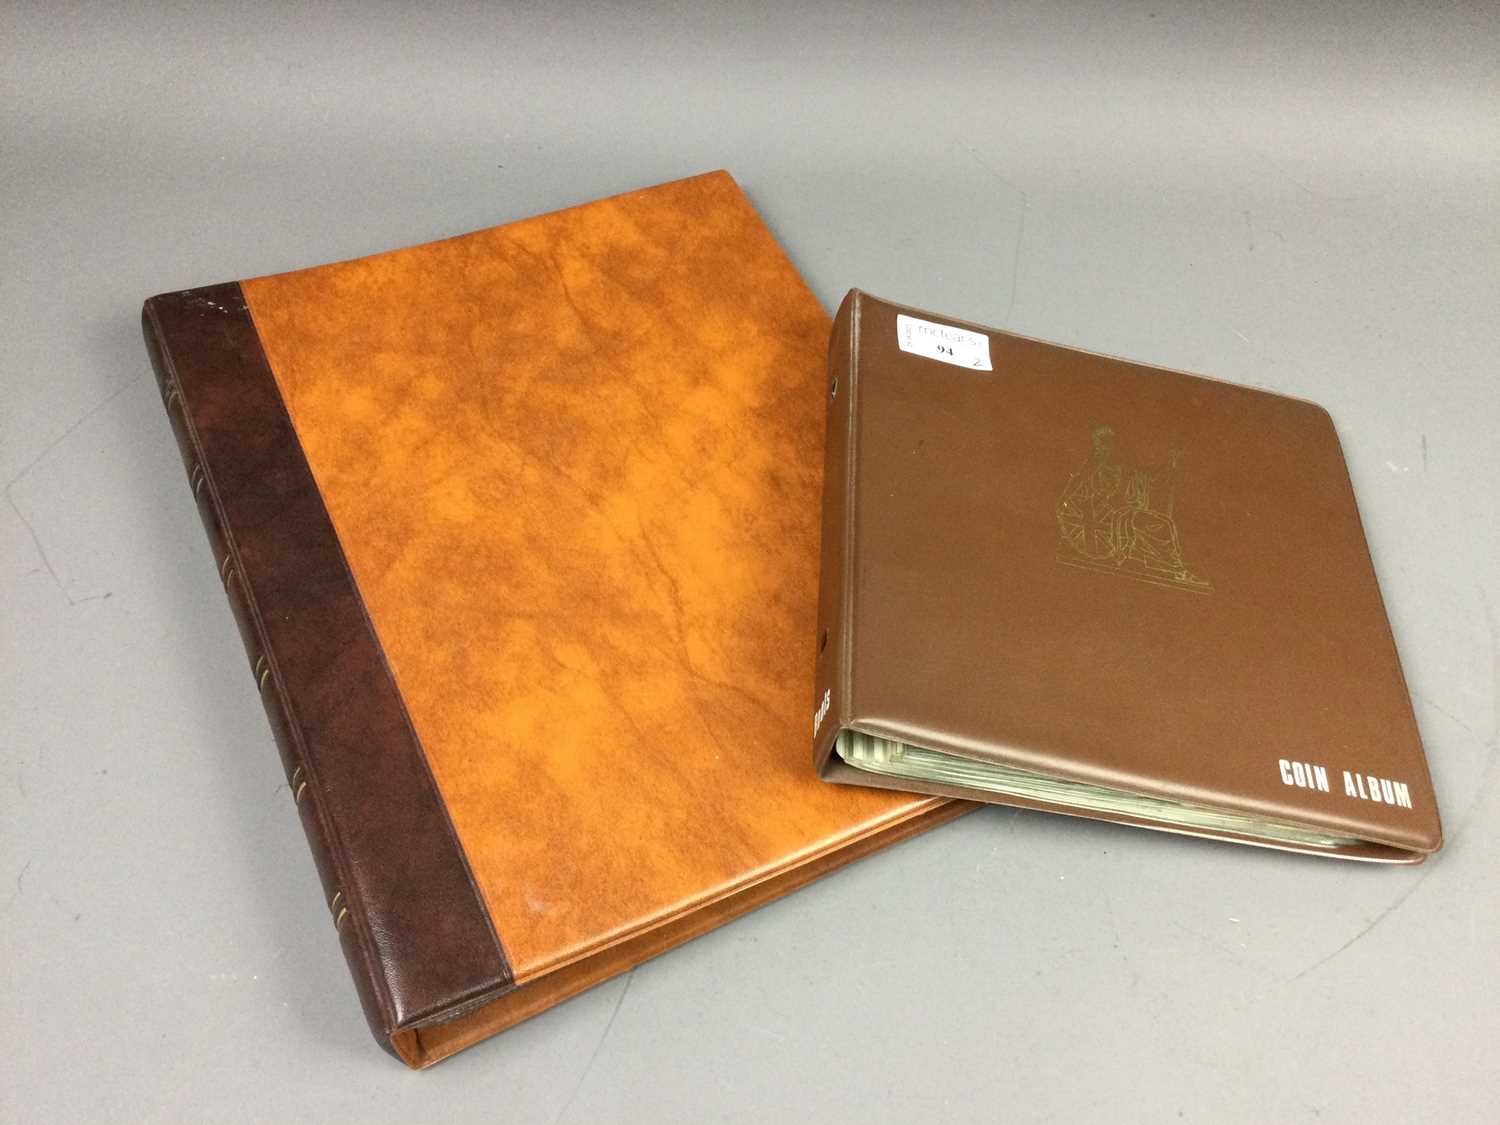 Lot 94 - A LOT OF TWO COIN ALBUMS